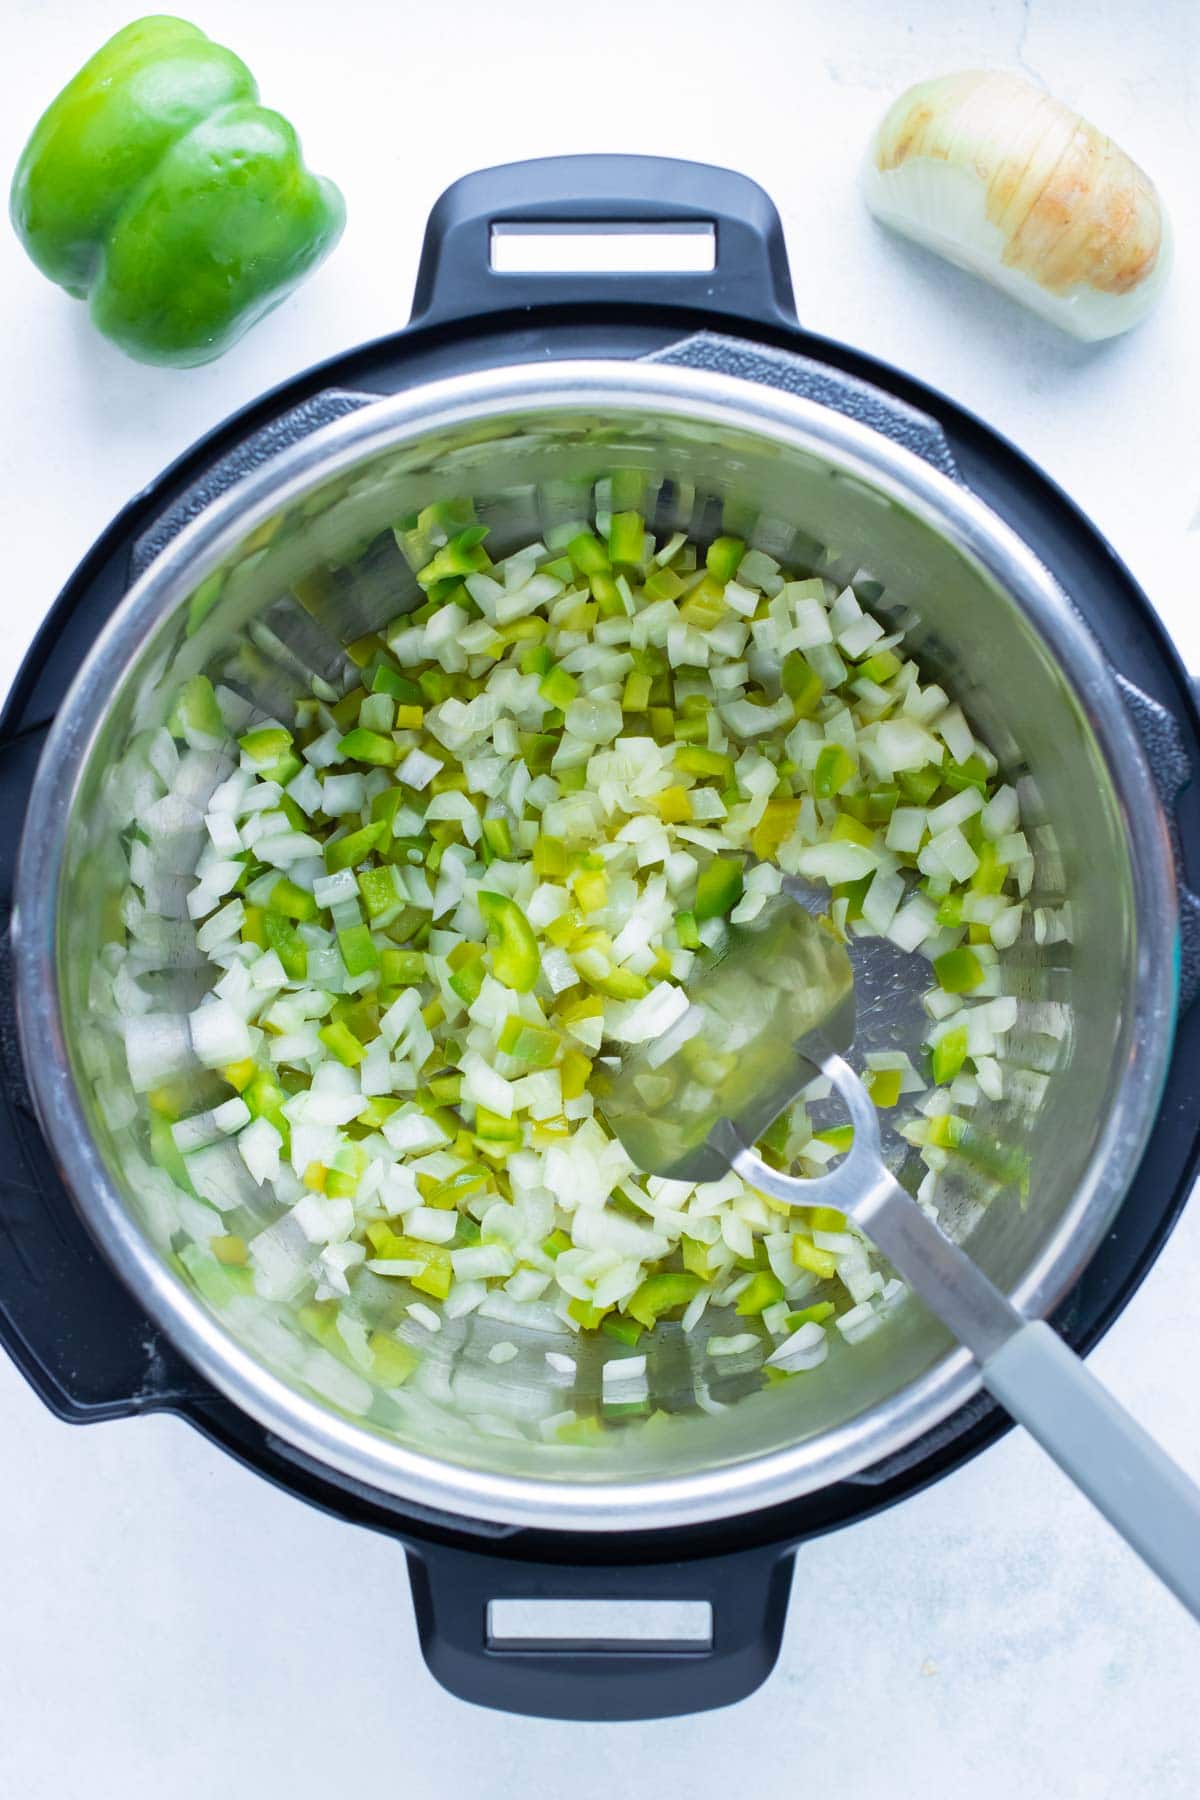 Green peppers and onions are sautéed in the instant pot.